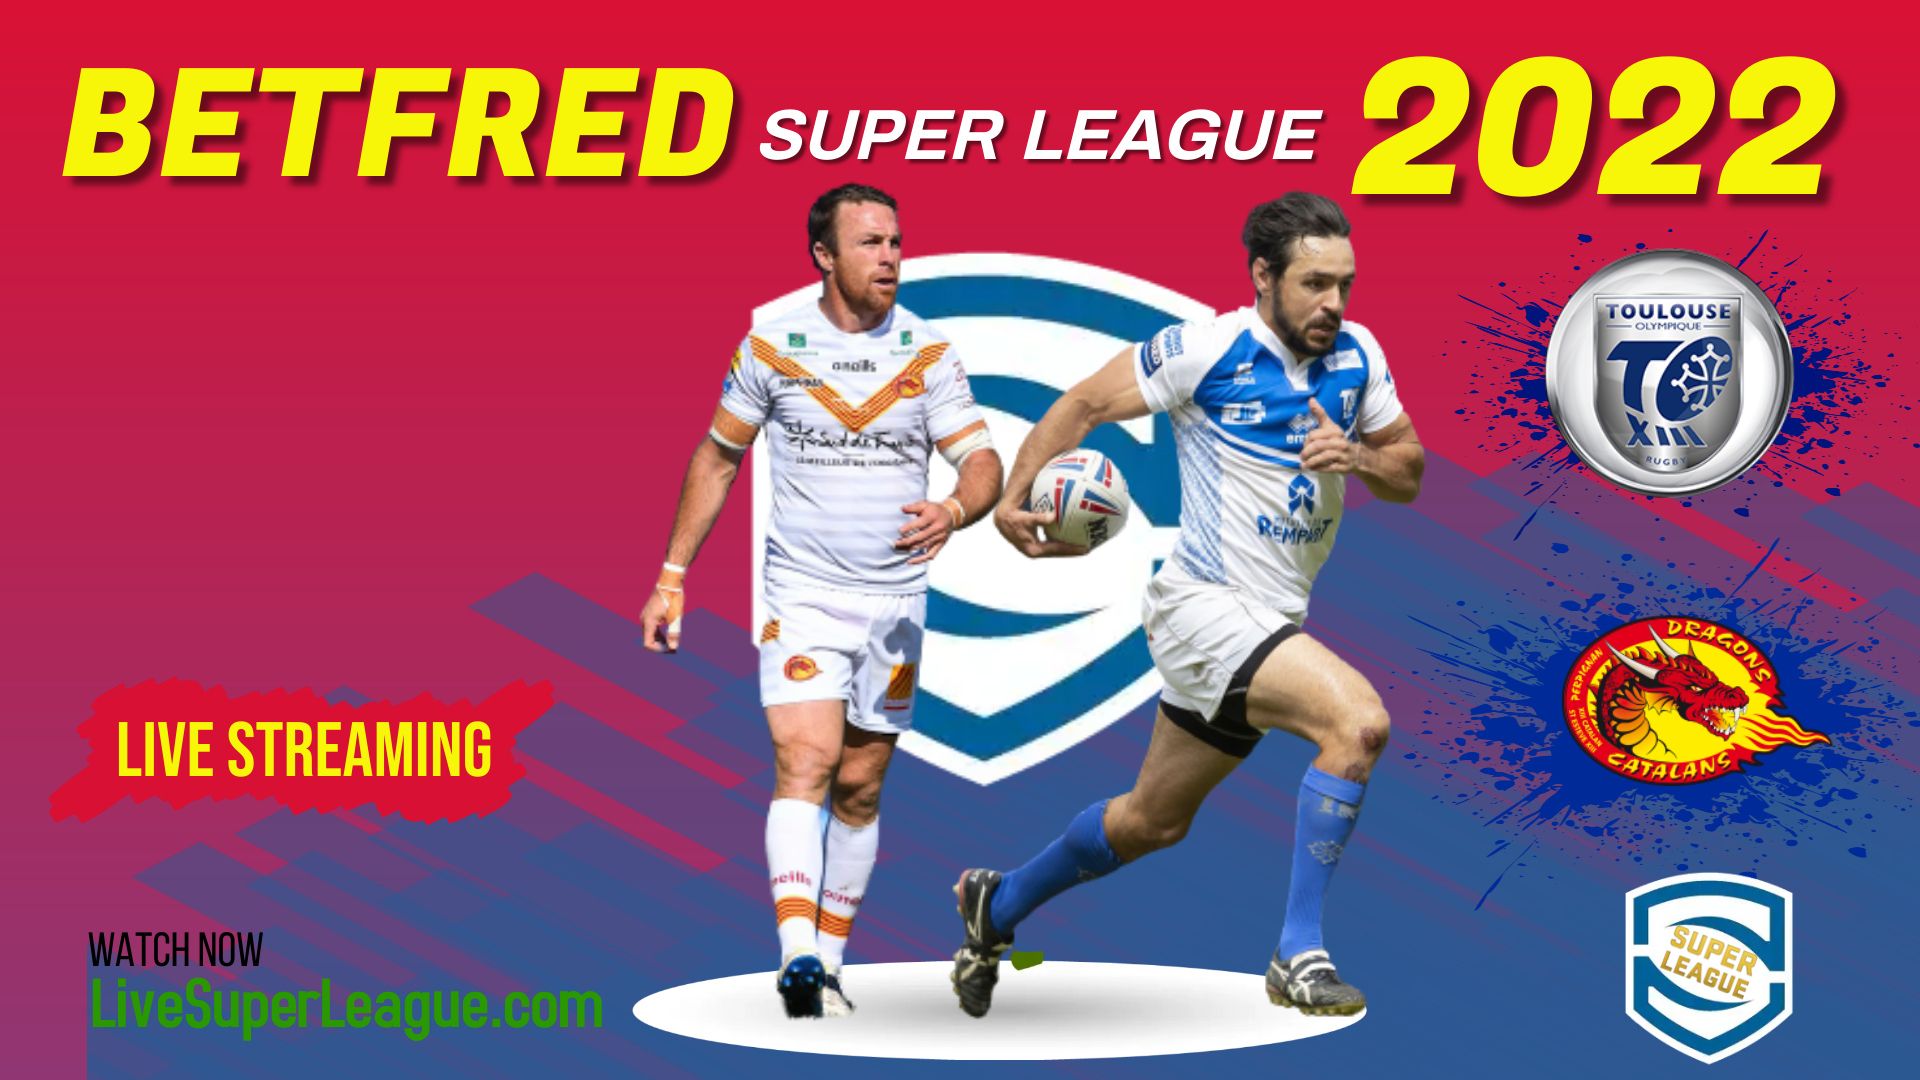 Toulouse Vs Catalans Dragons RD 25 Live Stream 2022 | Full Match Replay